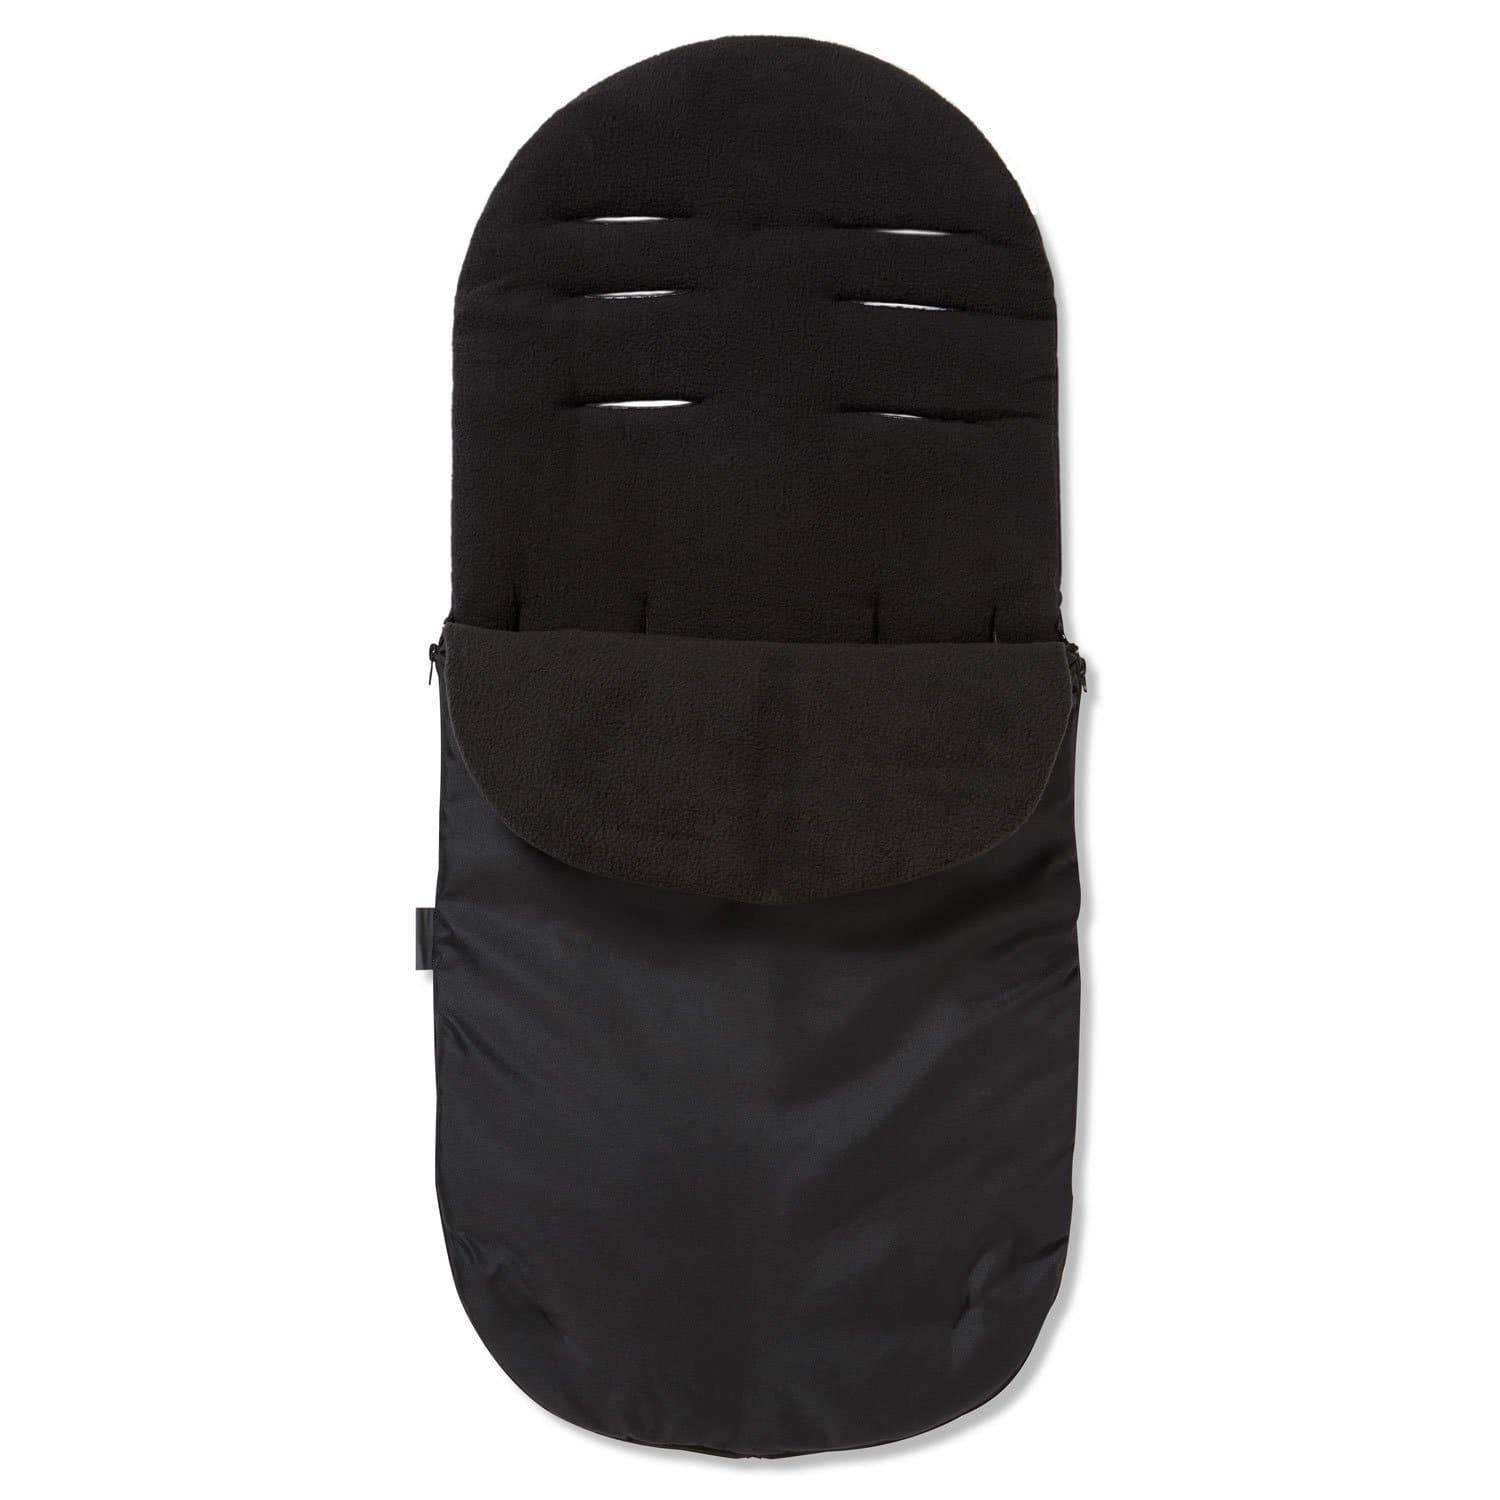 Footmuff / Cosy Toes Compatible with Baby Trend - Black / Fits All Models | For Your Little One